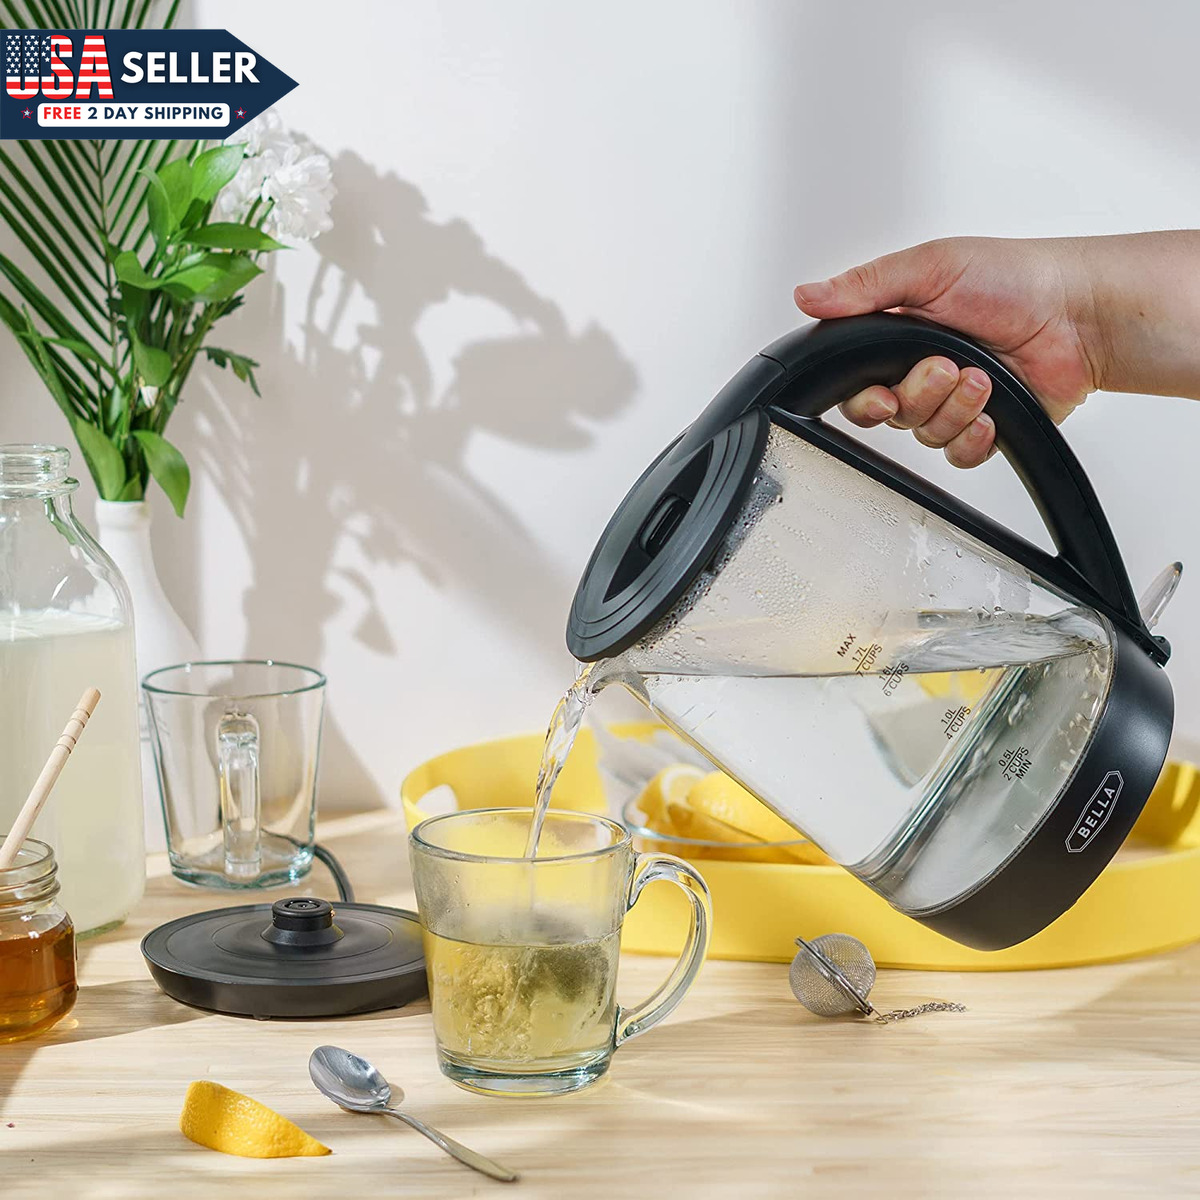 BELLA 1.7 Liter Glass Electric Kettle, Quickly Boil 7 Cups of Water in 6-7  Minut